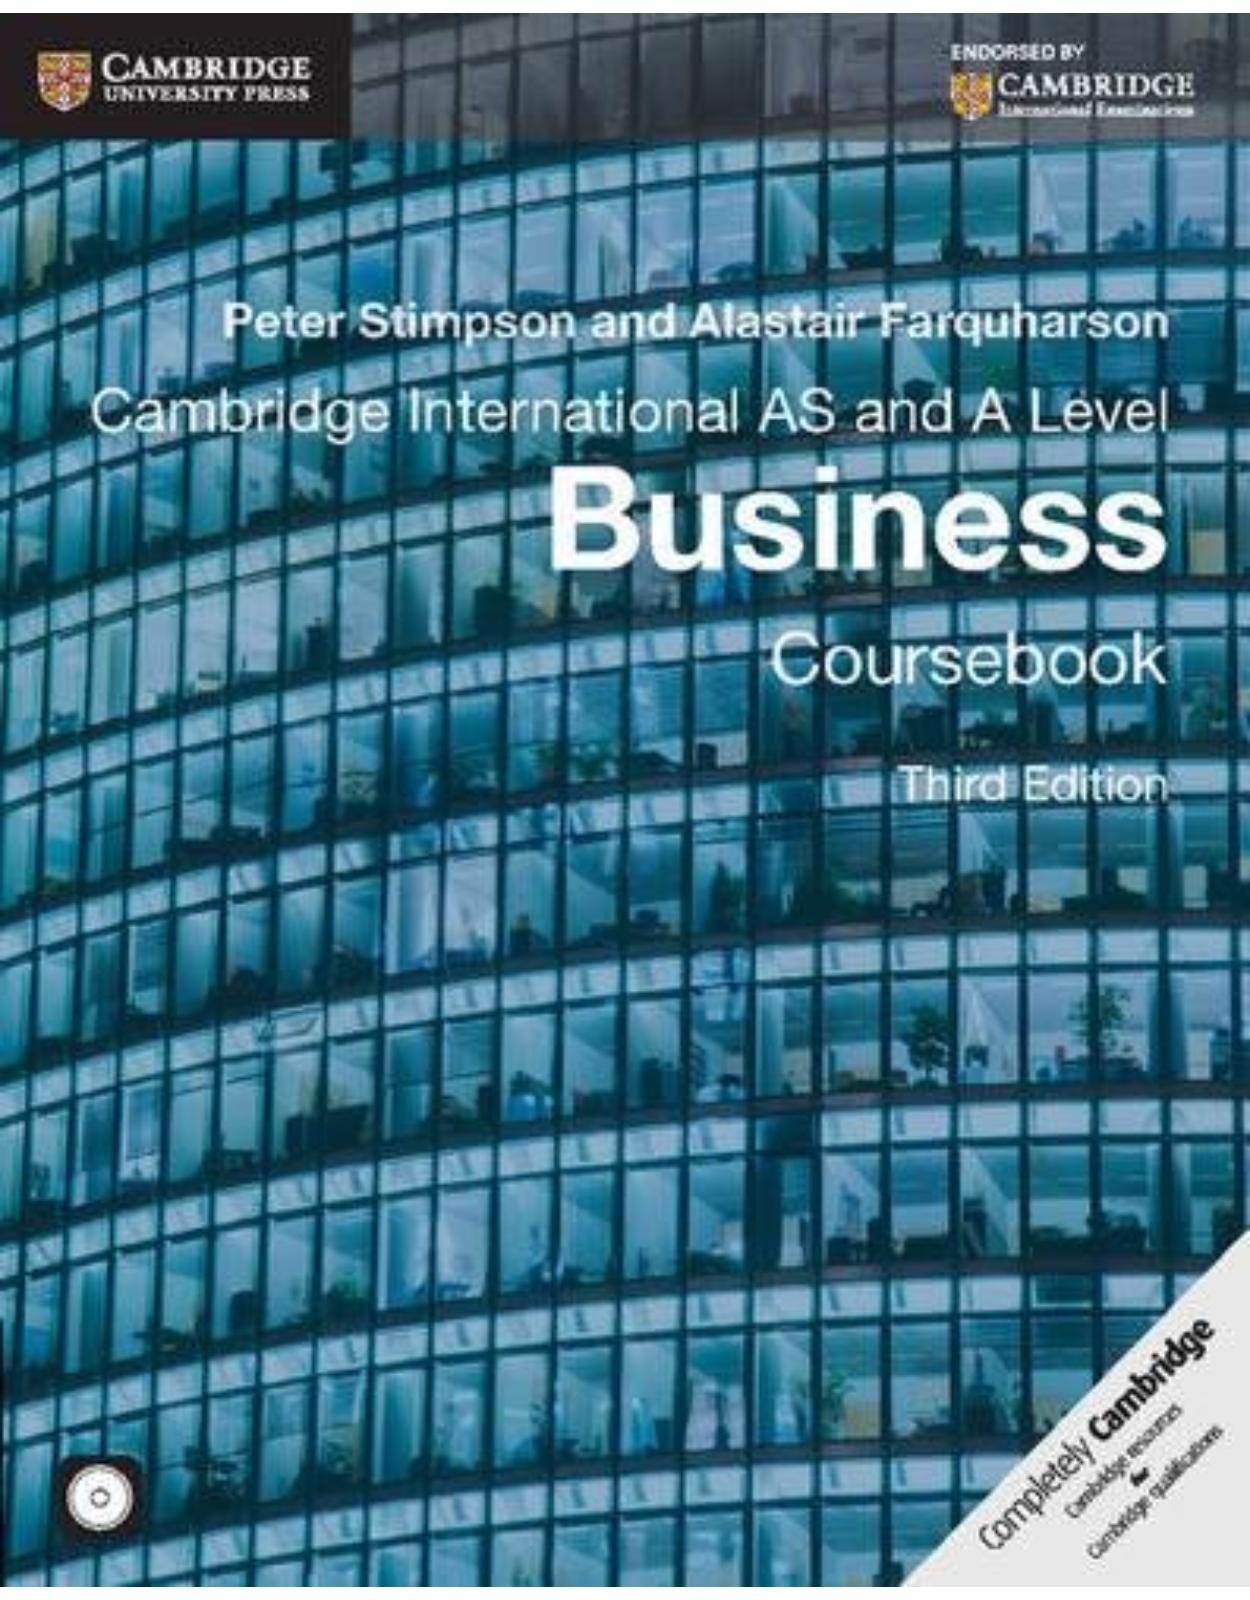 Cambridge International AS and A Level Business Coursebook with CD-ROM (Cambridge International Examinations)